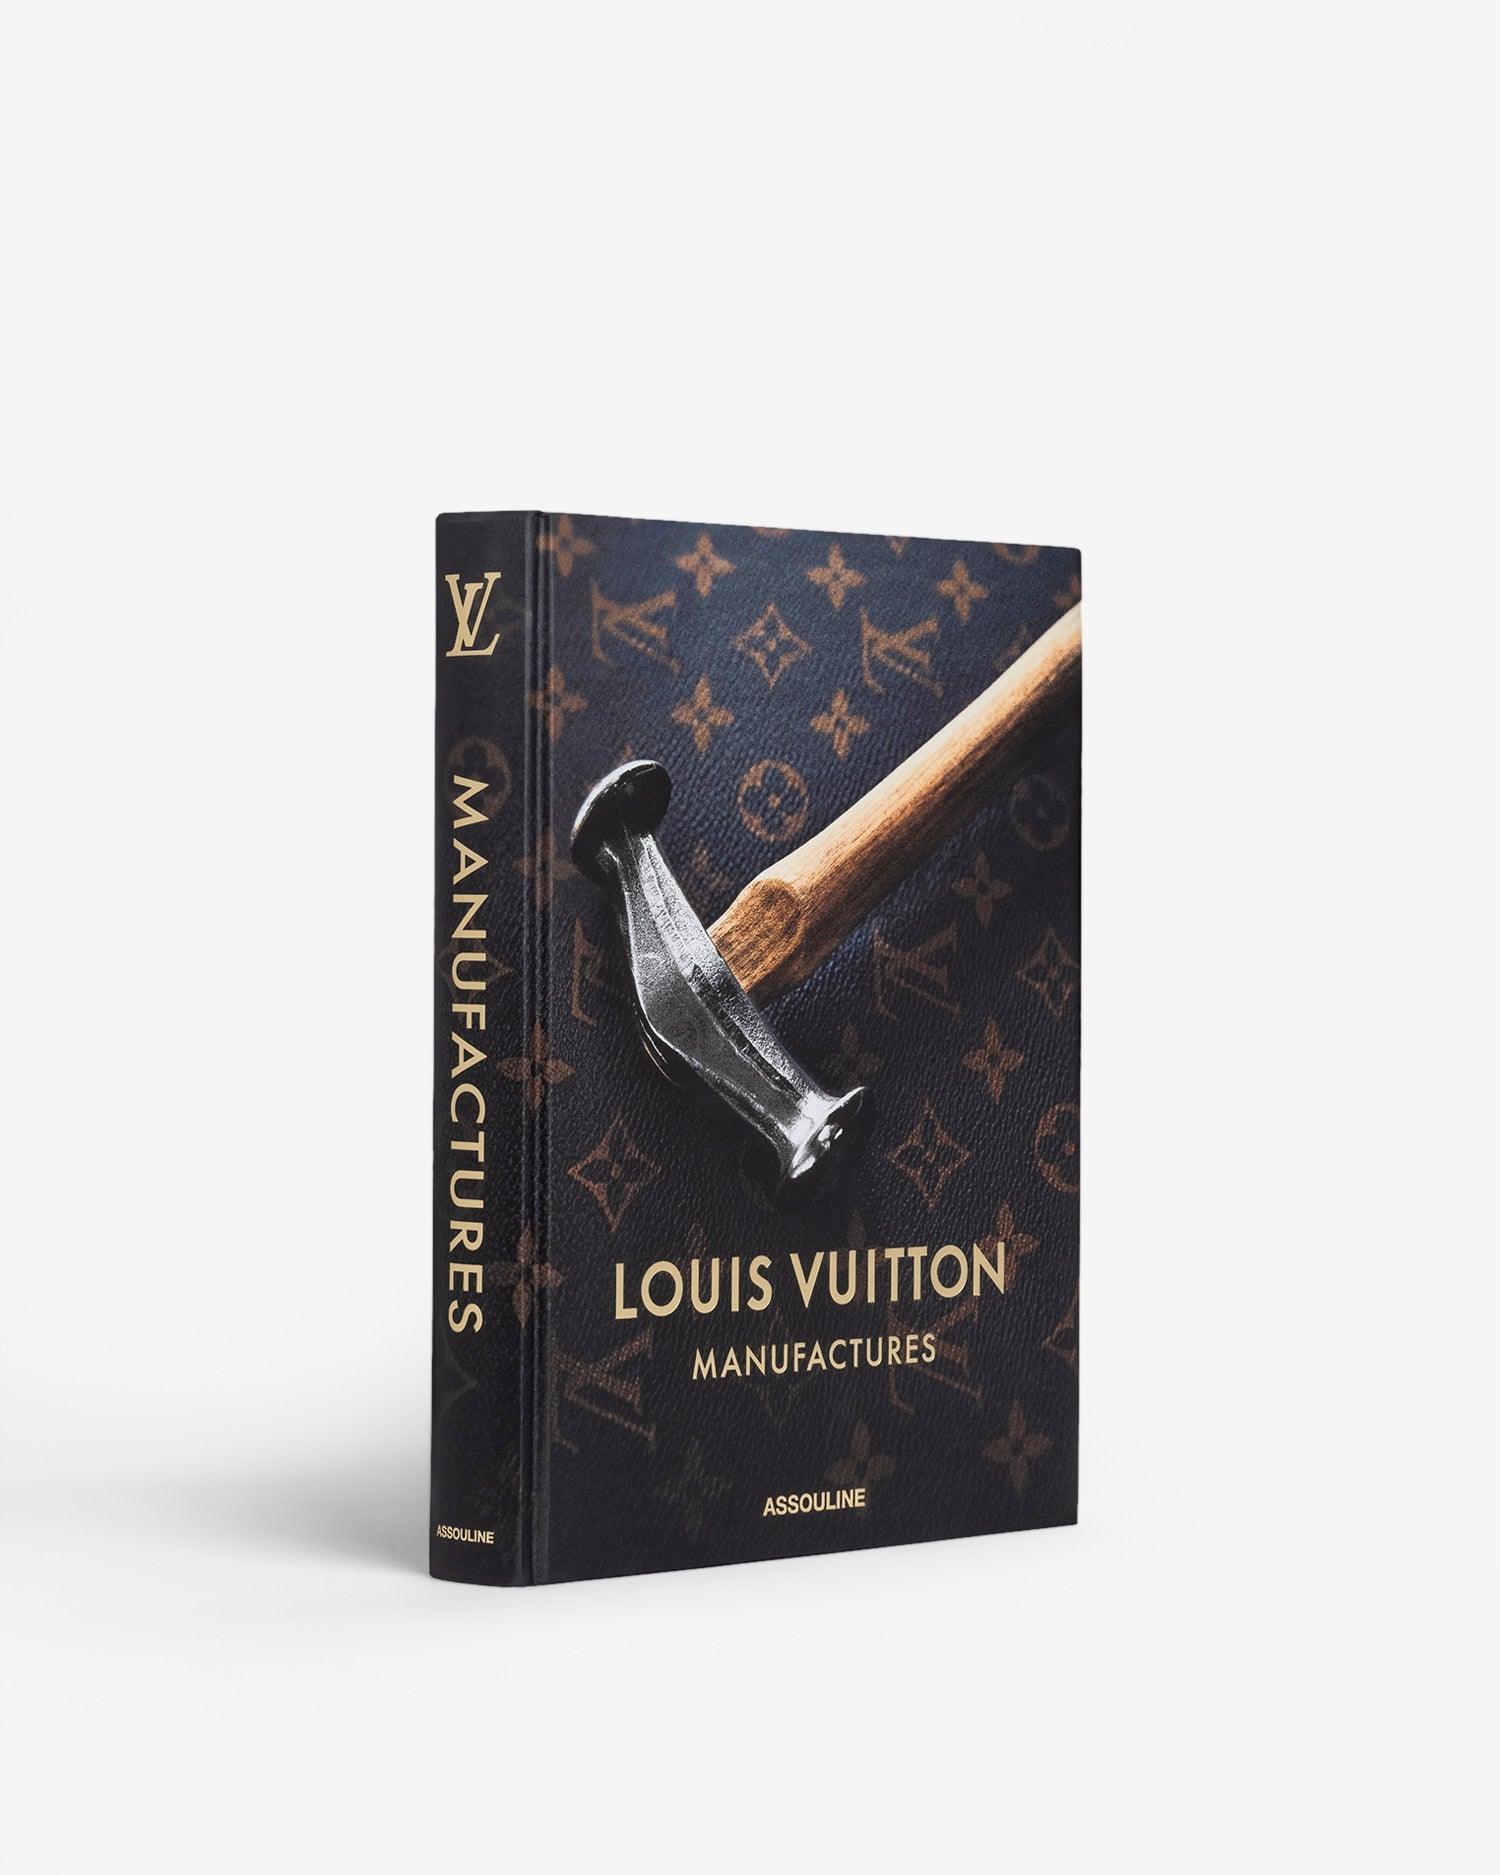 Louis Vuitton Manufactures by Nicholas Foulkes - Coffee Table Book ...